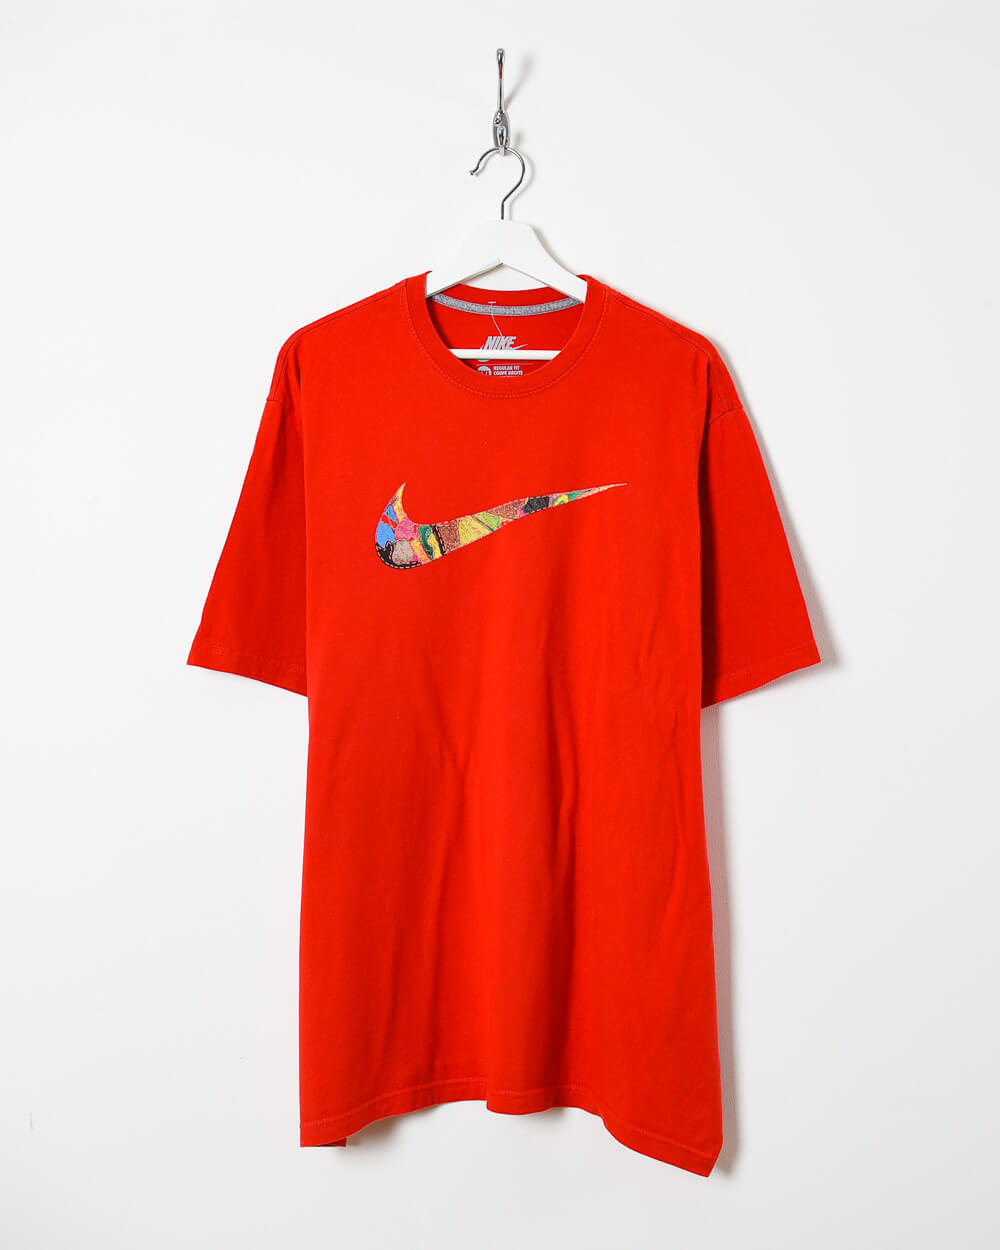 Nike T-Shirt - XX-Large - Domno Vintage 90s, 80s, 00s Retro and Vintage Clothing 